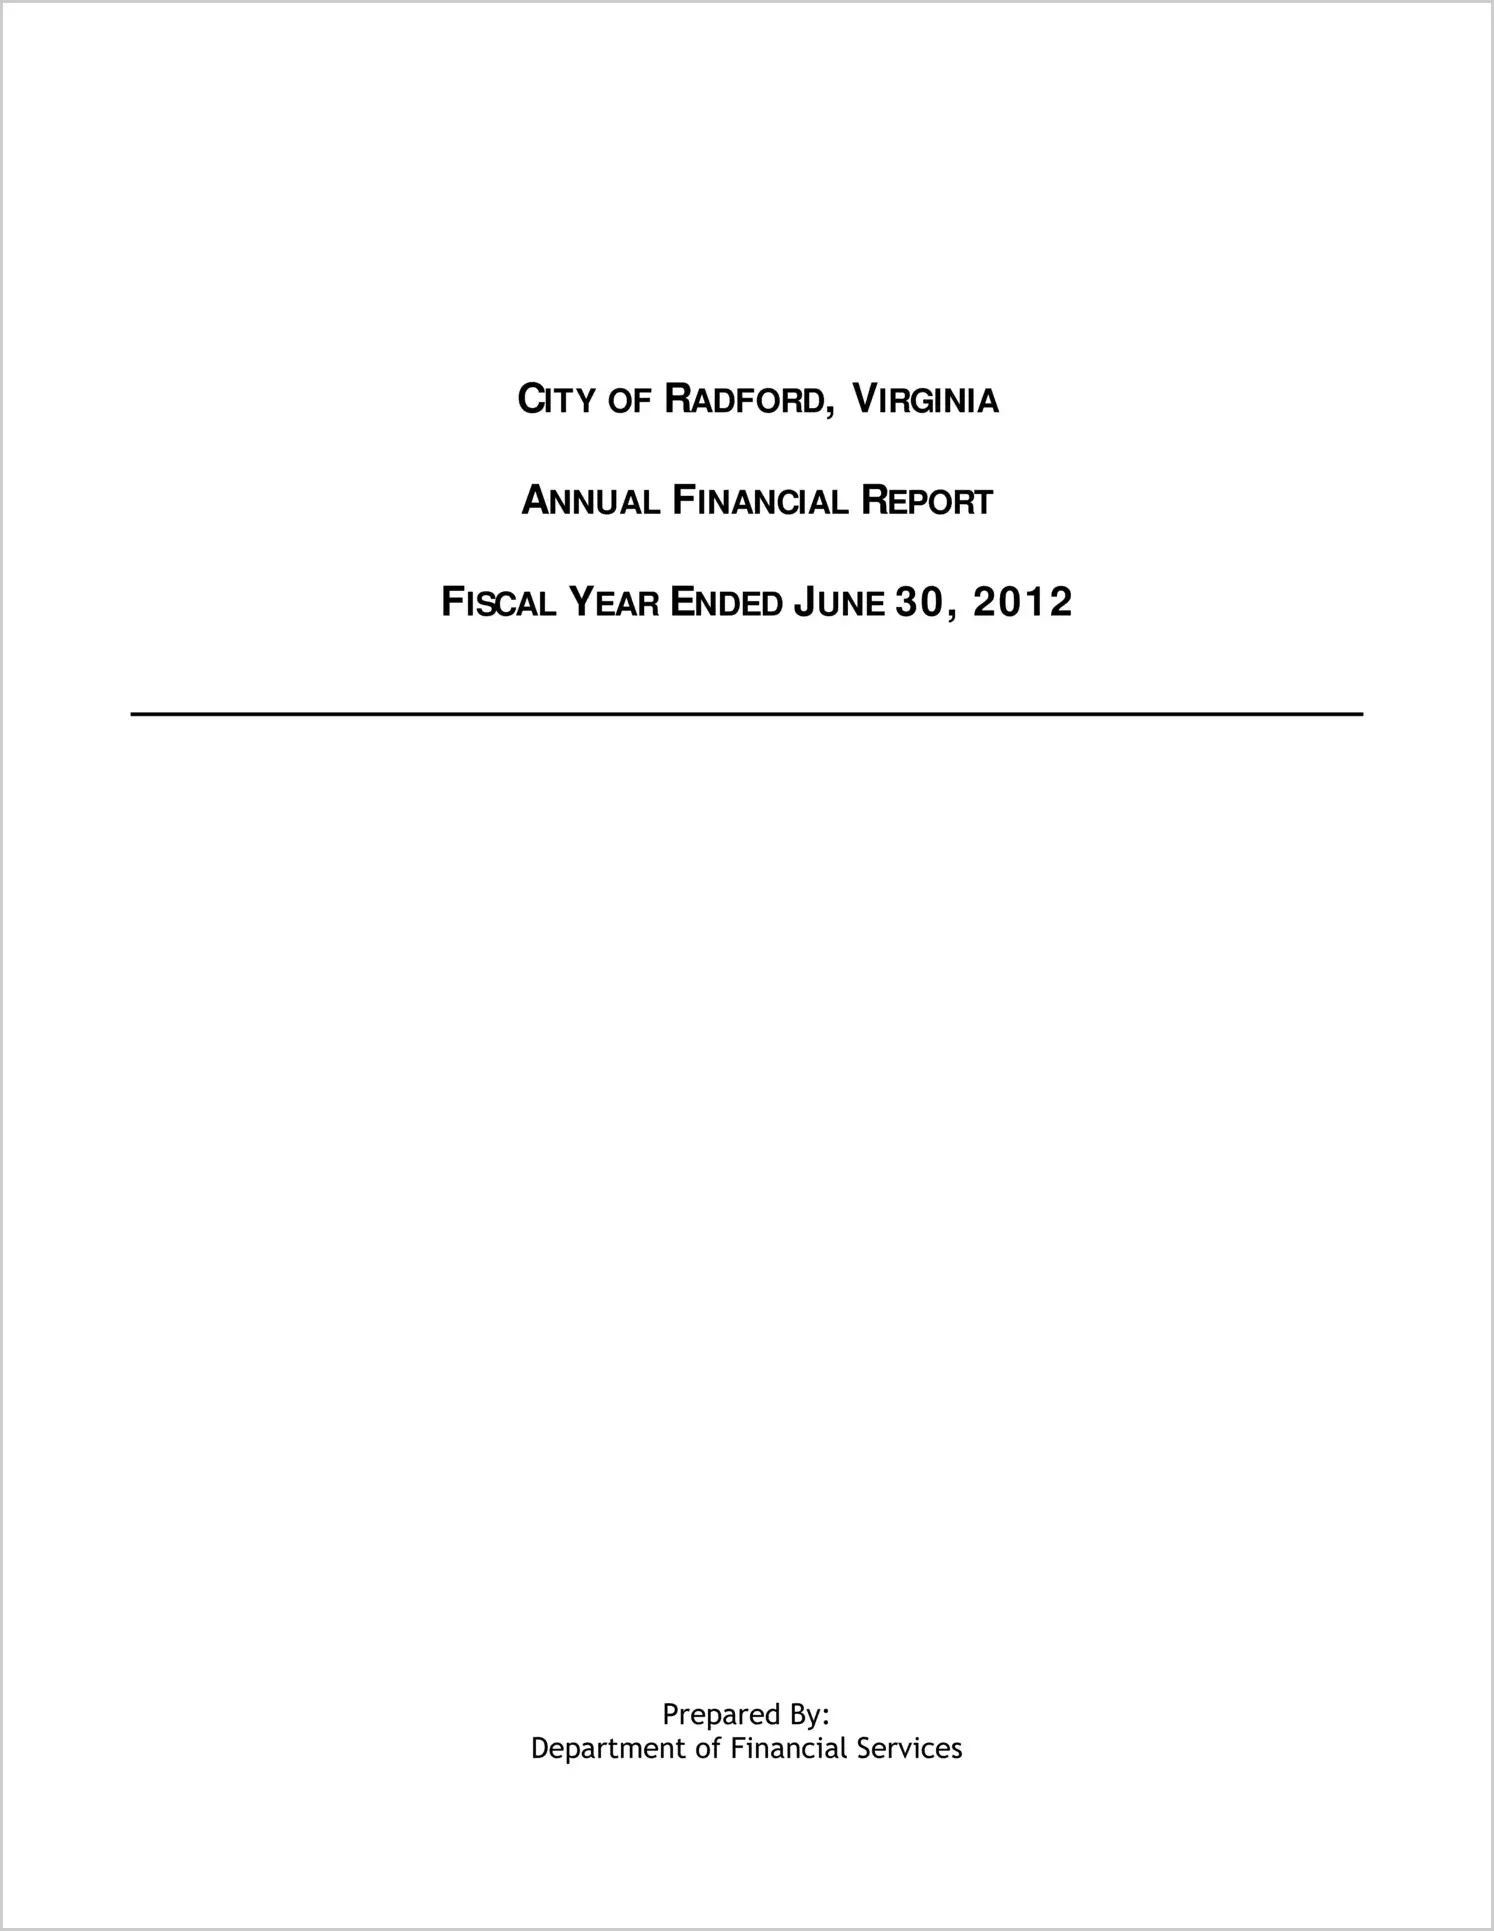 2012 Annual Financial Report for City of Radford